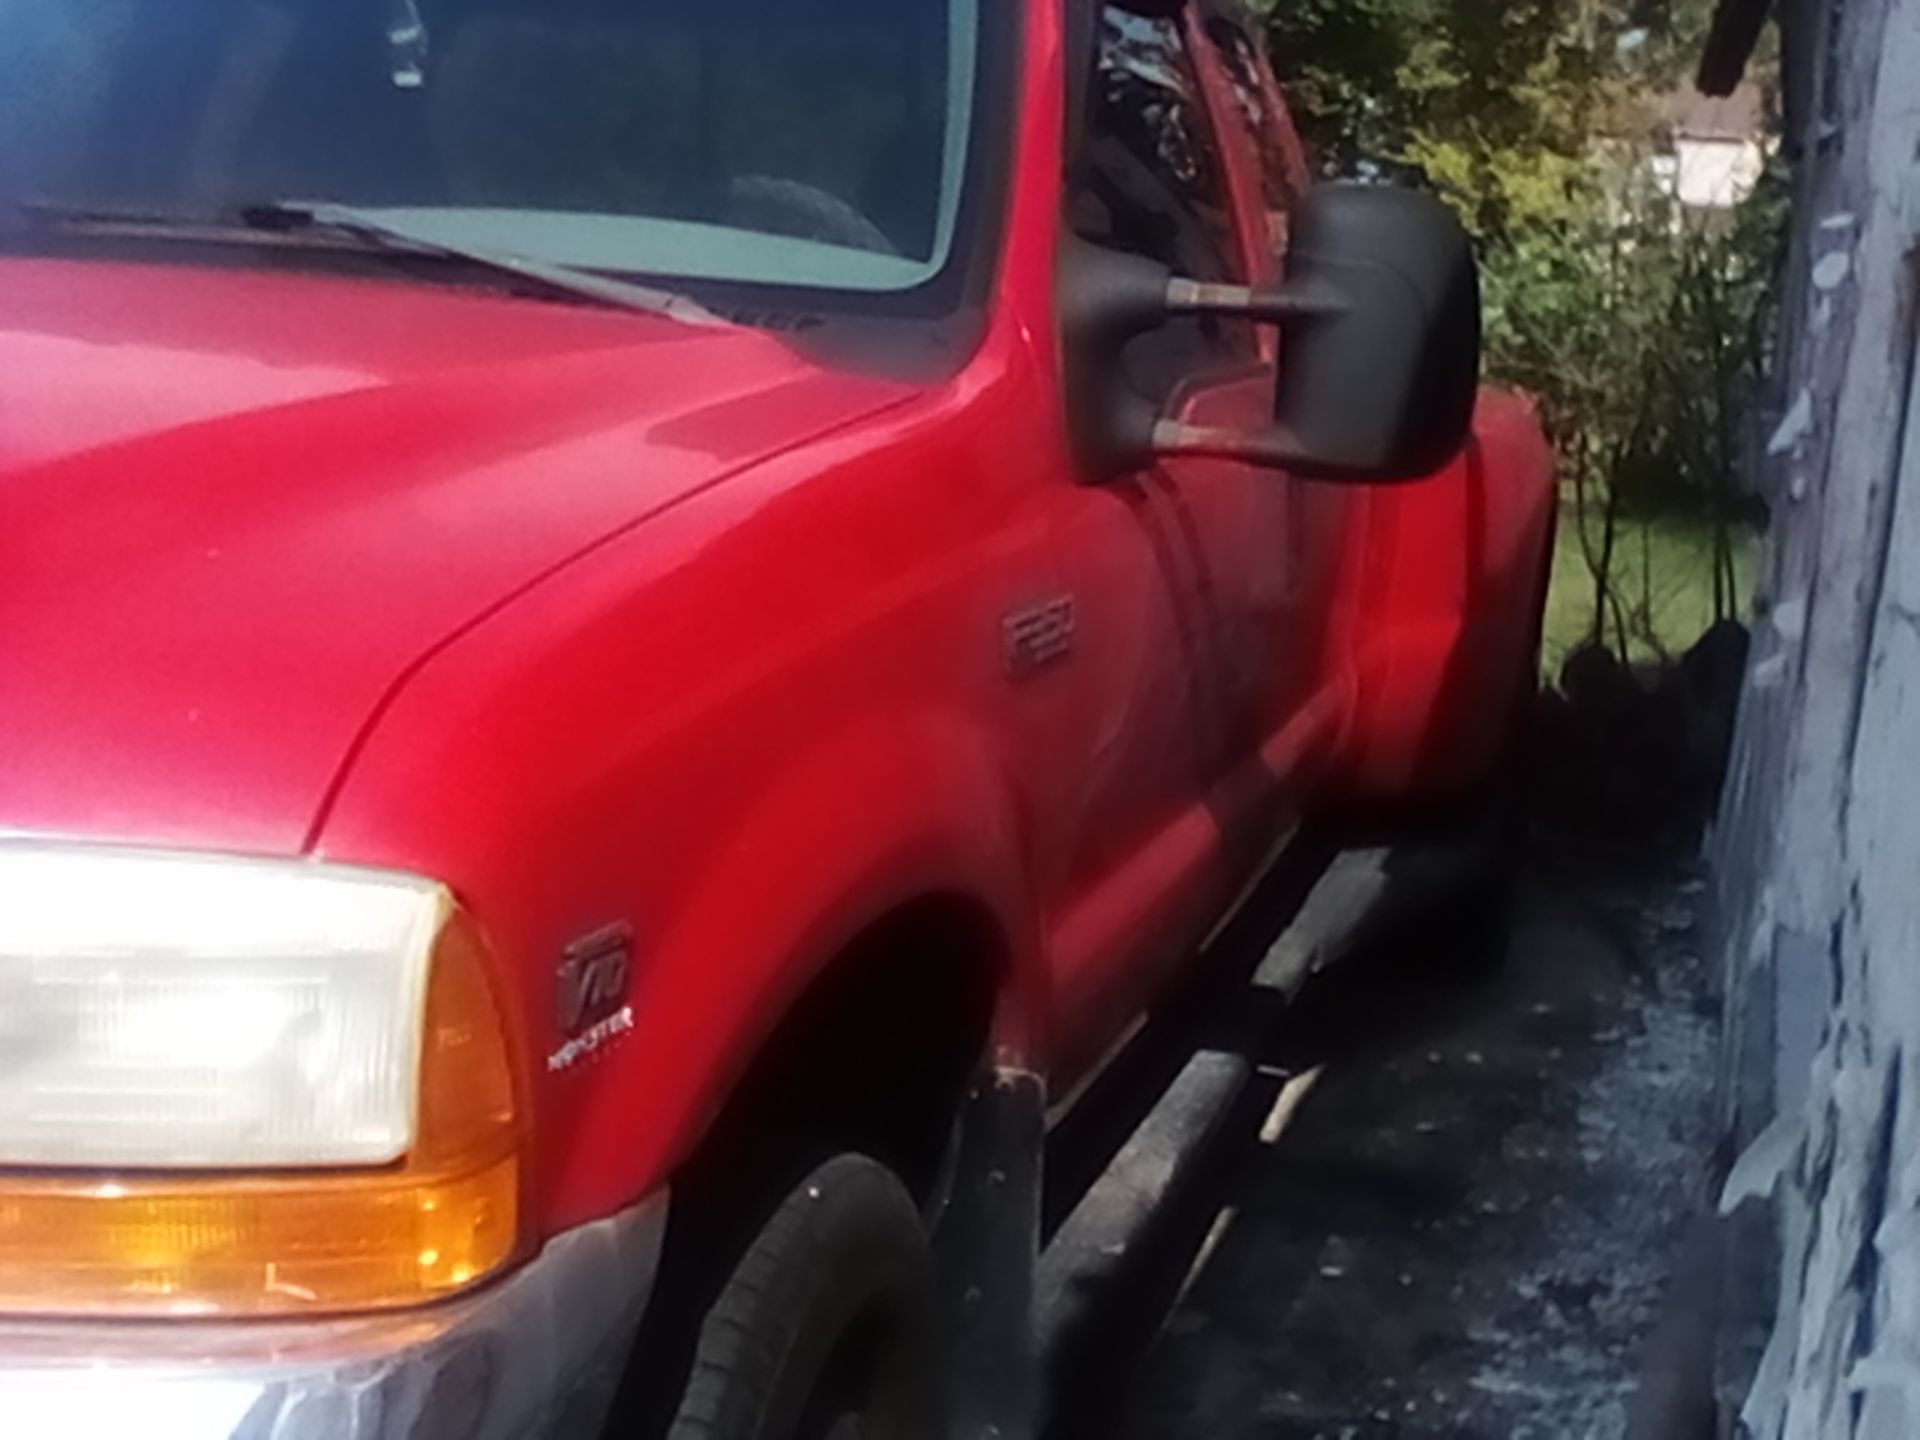 1999 Ford F-350 Dually Pick Up Truck, Vin 1FTWX33S5XEE57095, 4 Wheel Drive, 249,000 Approx. Miles - Image 5 of 15